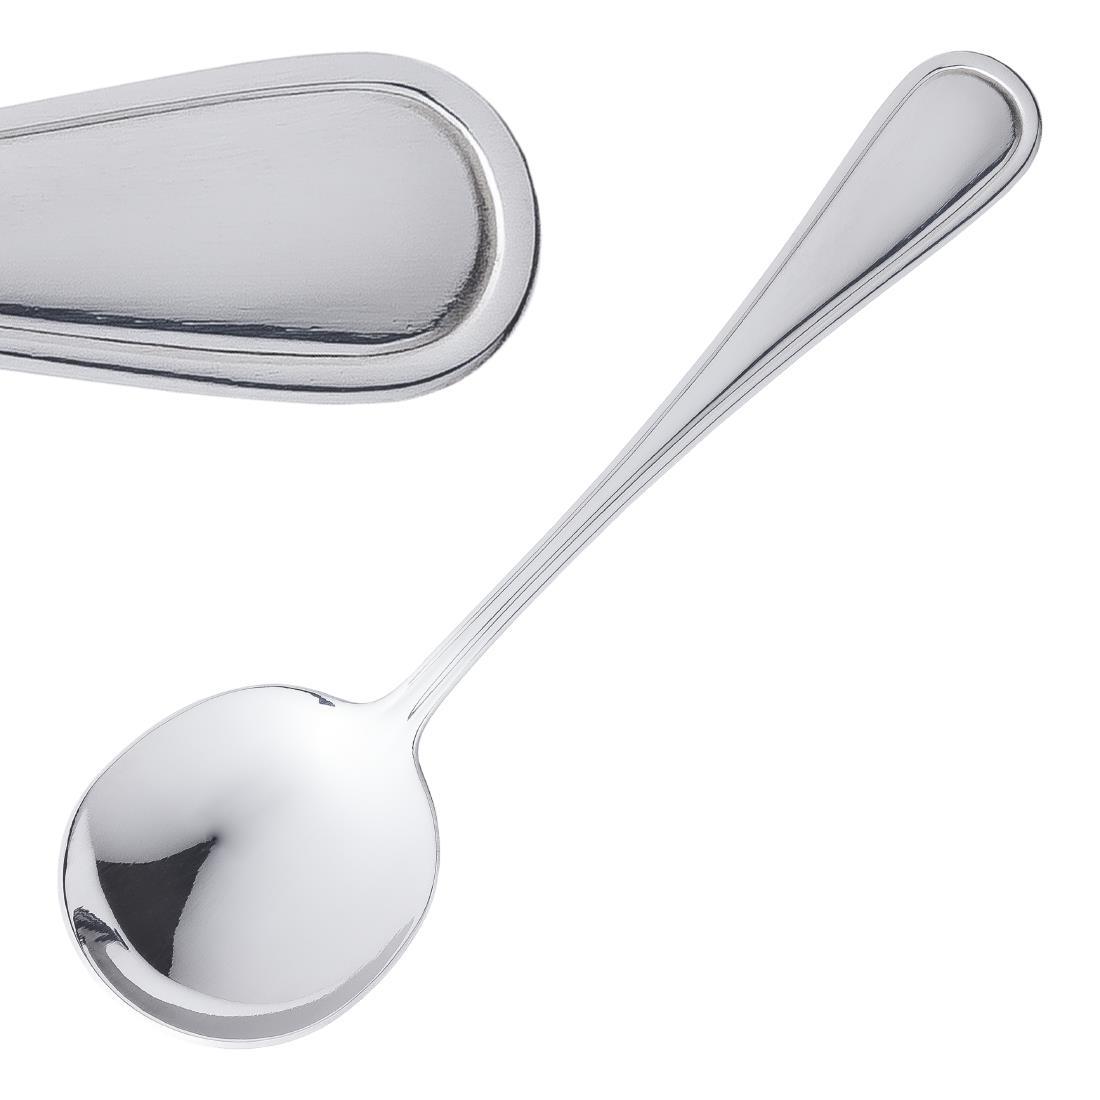 Olympia Mayfair Soup Spoon (Pack of 12) - D511  - 1